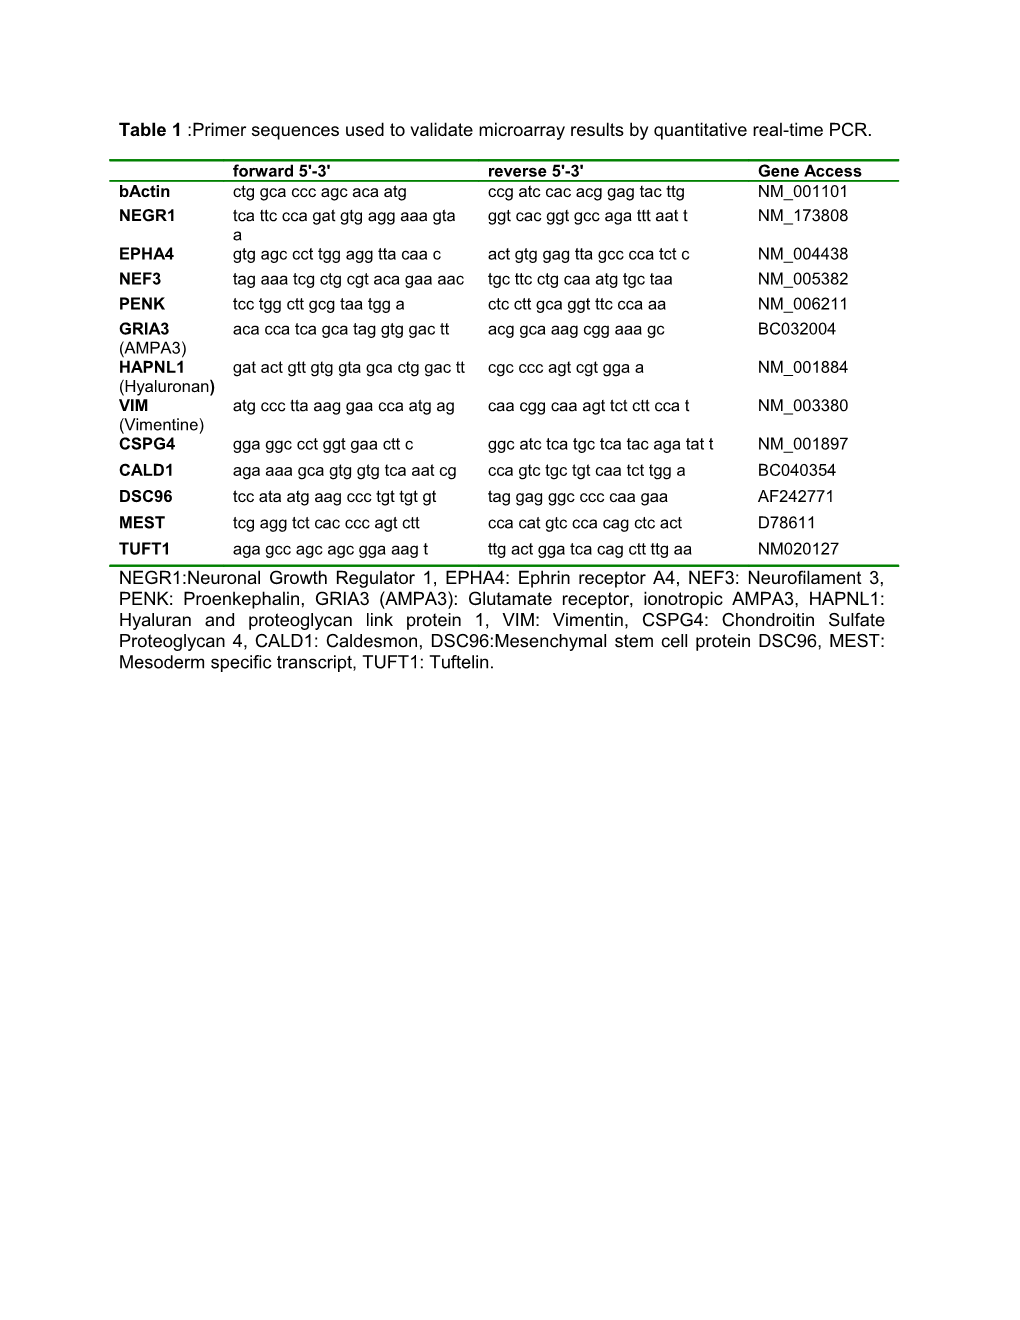 Table 1 :Primers Sequences Used to Validate the Microarray Results by Quantitative Real-Time PCR